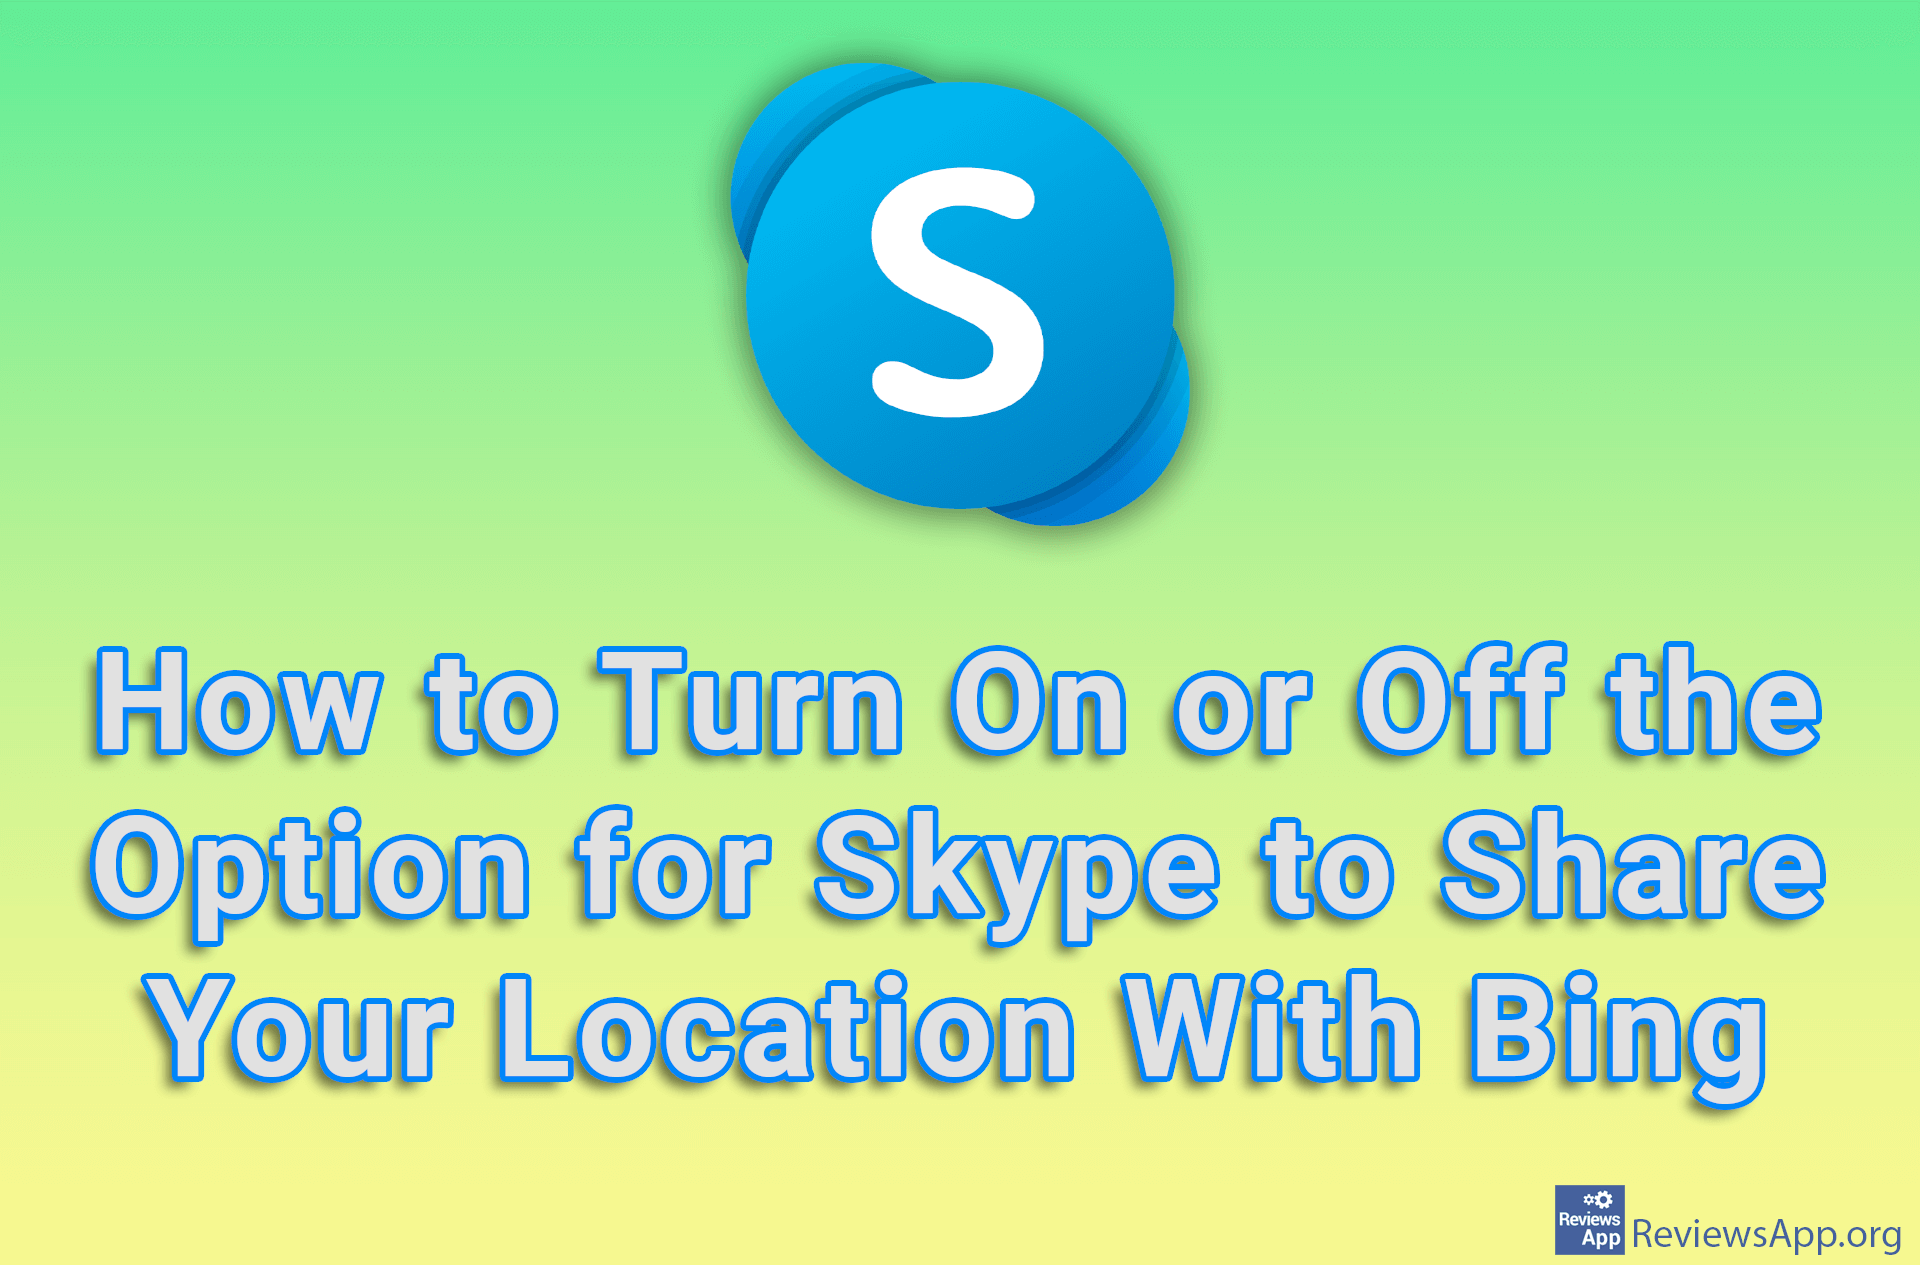 How to Turn On or Off the Option for Skype to Share Your Location With Bing